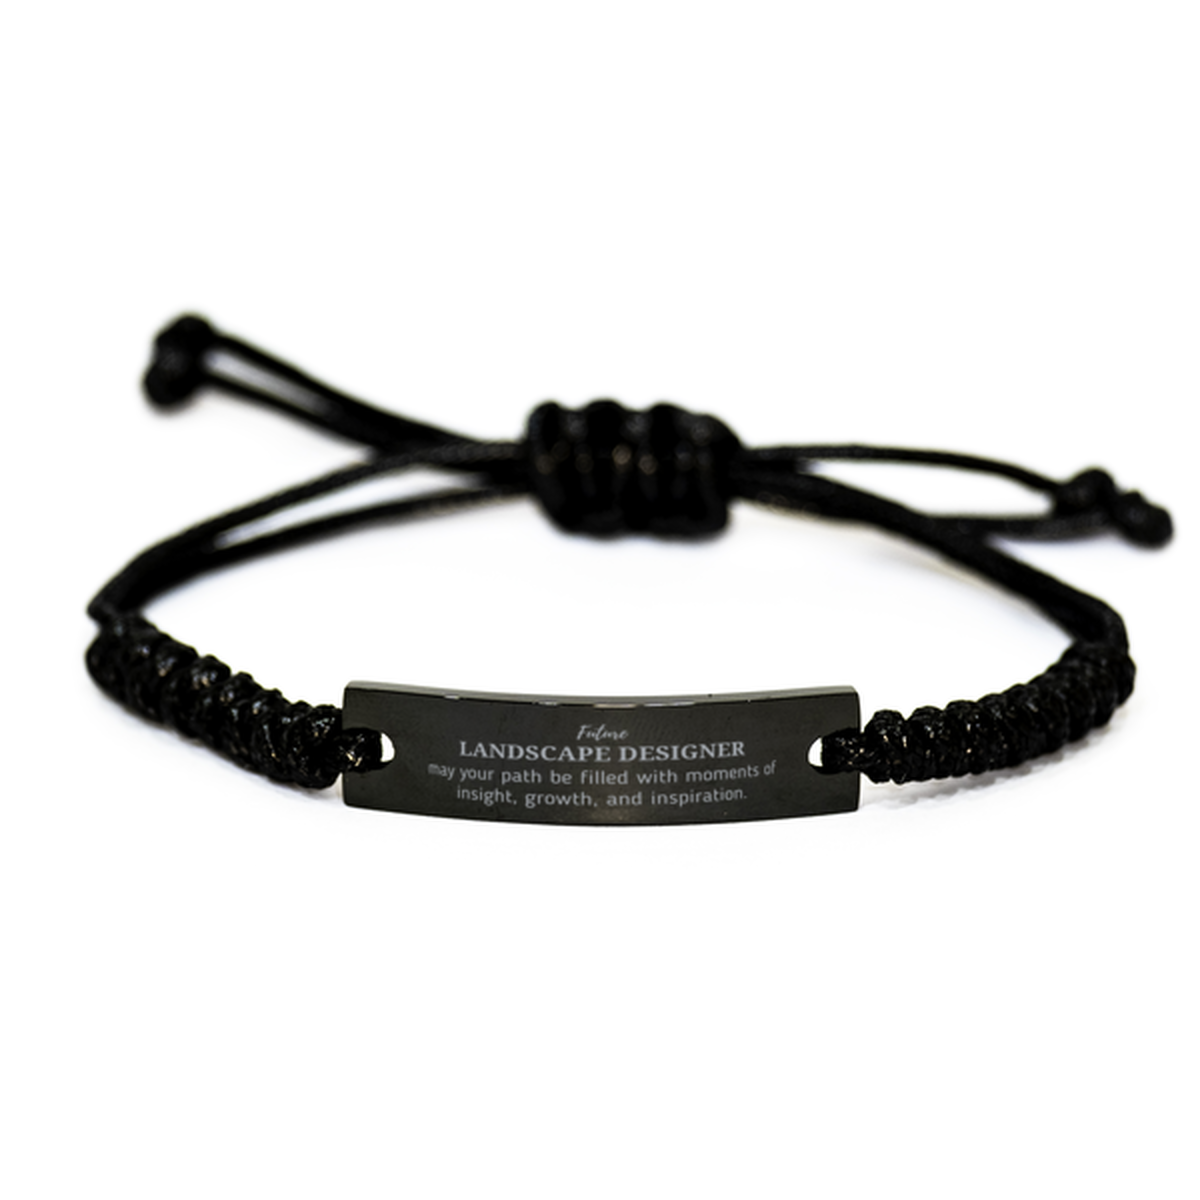 Future Landscape Designer Gifts, May your path be filled with moments of insight, Graduation Gifts for New Landscape Designer, Christmas Unique Black Rope Bracelet For Men, Women, Friends